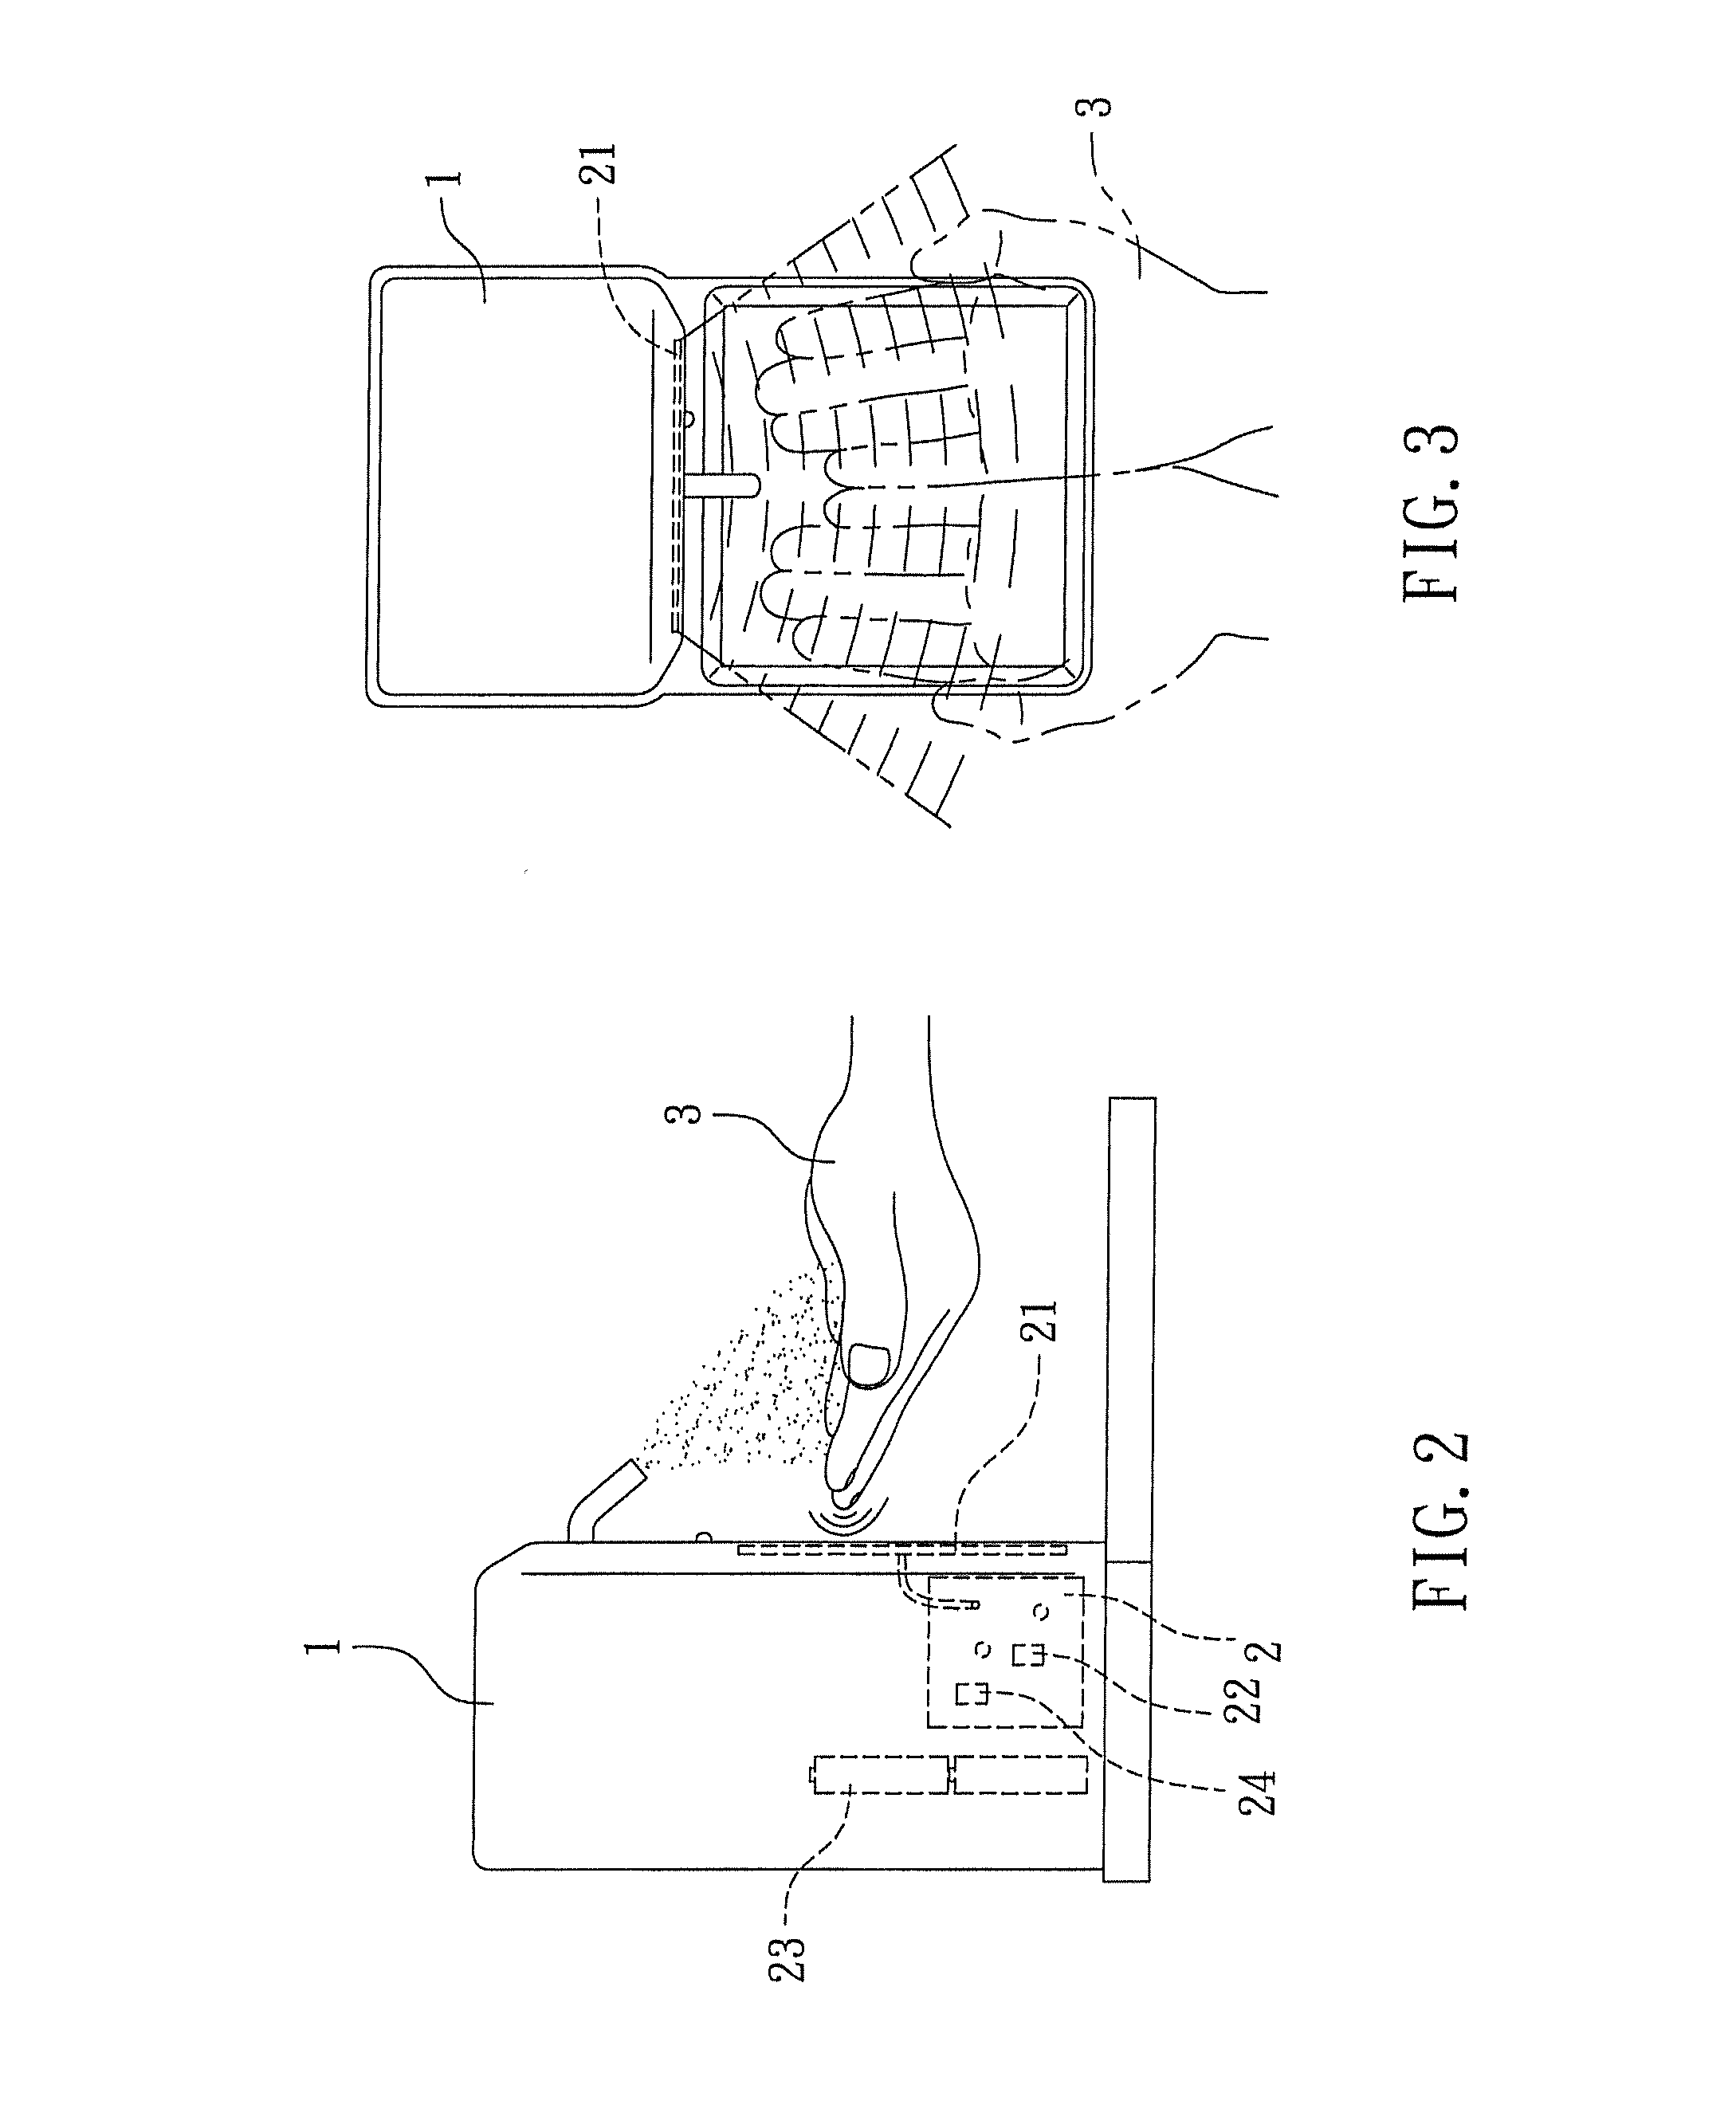 Self-contained apparatus/automatic door having a non-contact sensor switch assembly